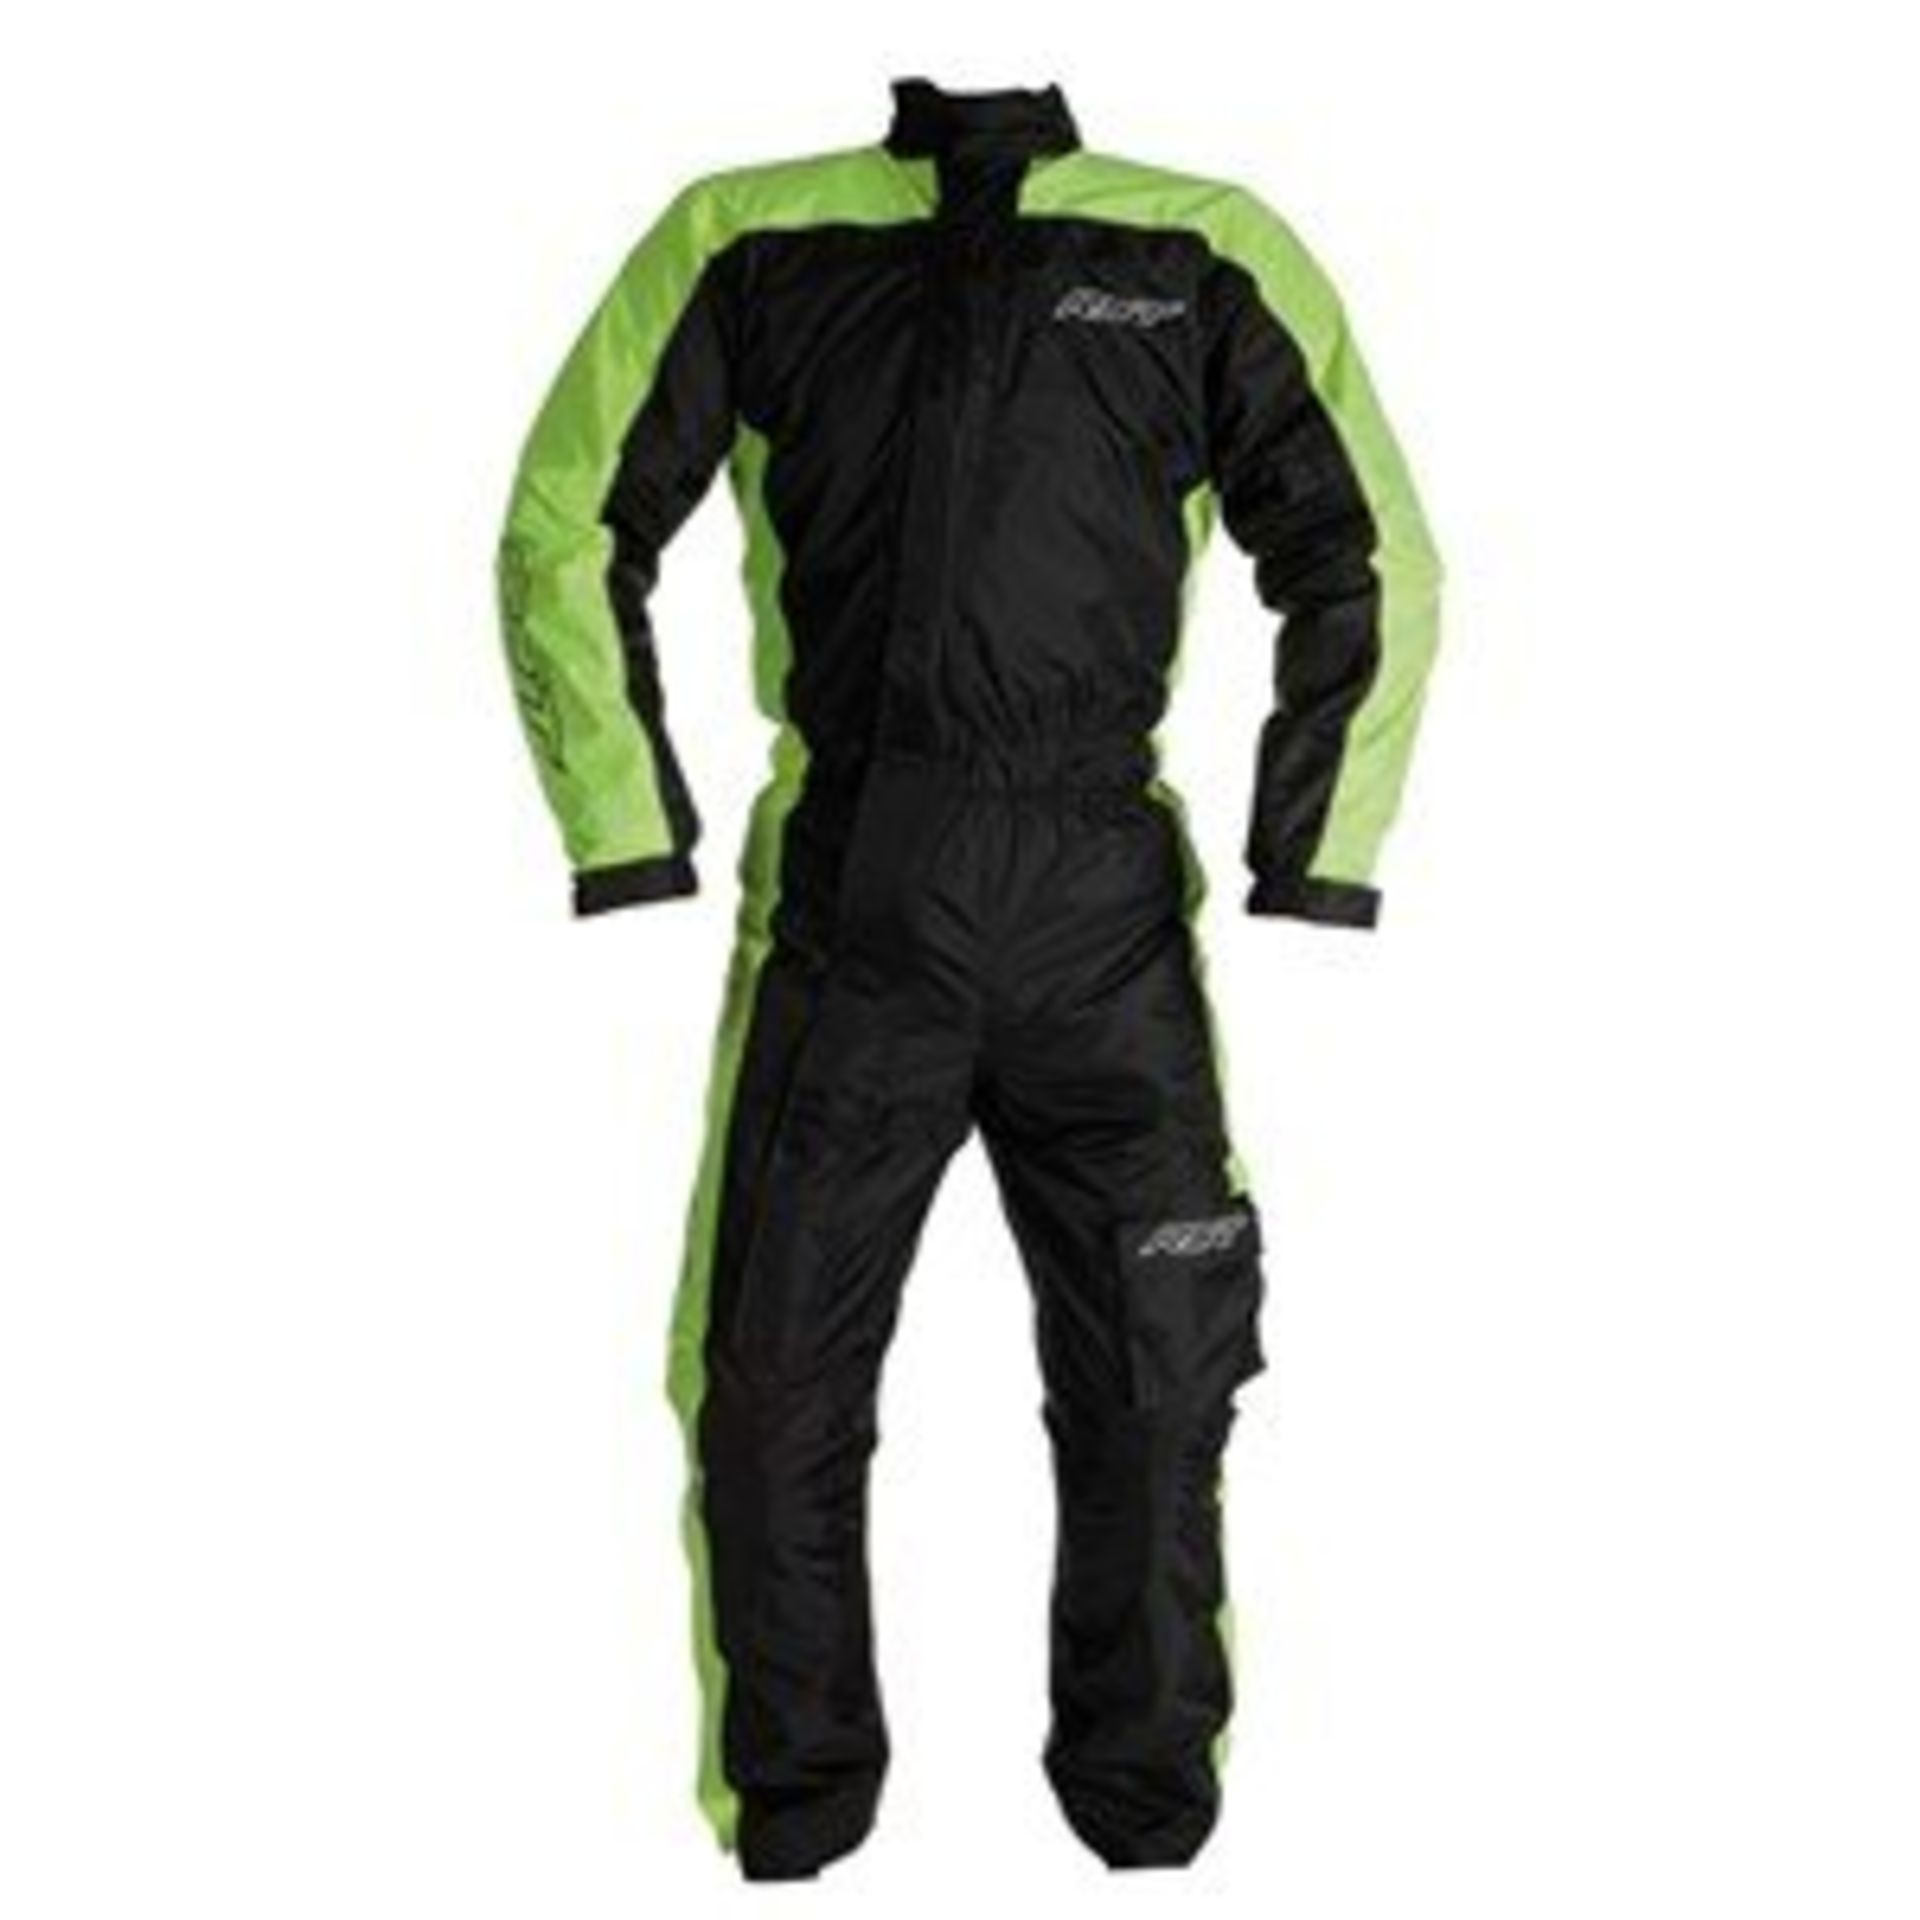 2 x RST Waterproof Motorcycle Over Suit For Leathers | Black/Safety Yellow | Size: L | RRP£100